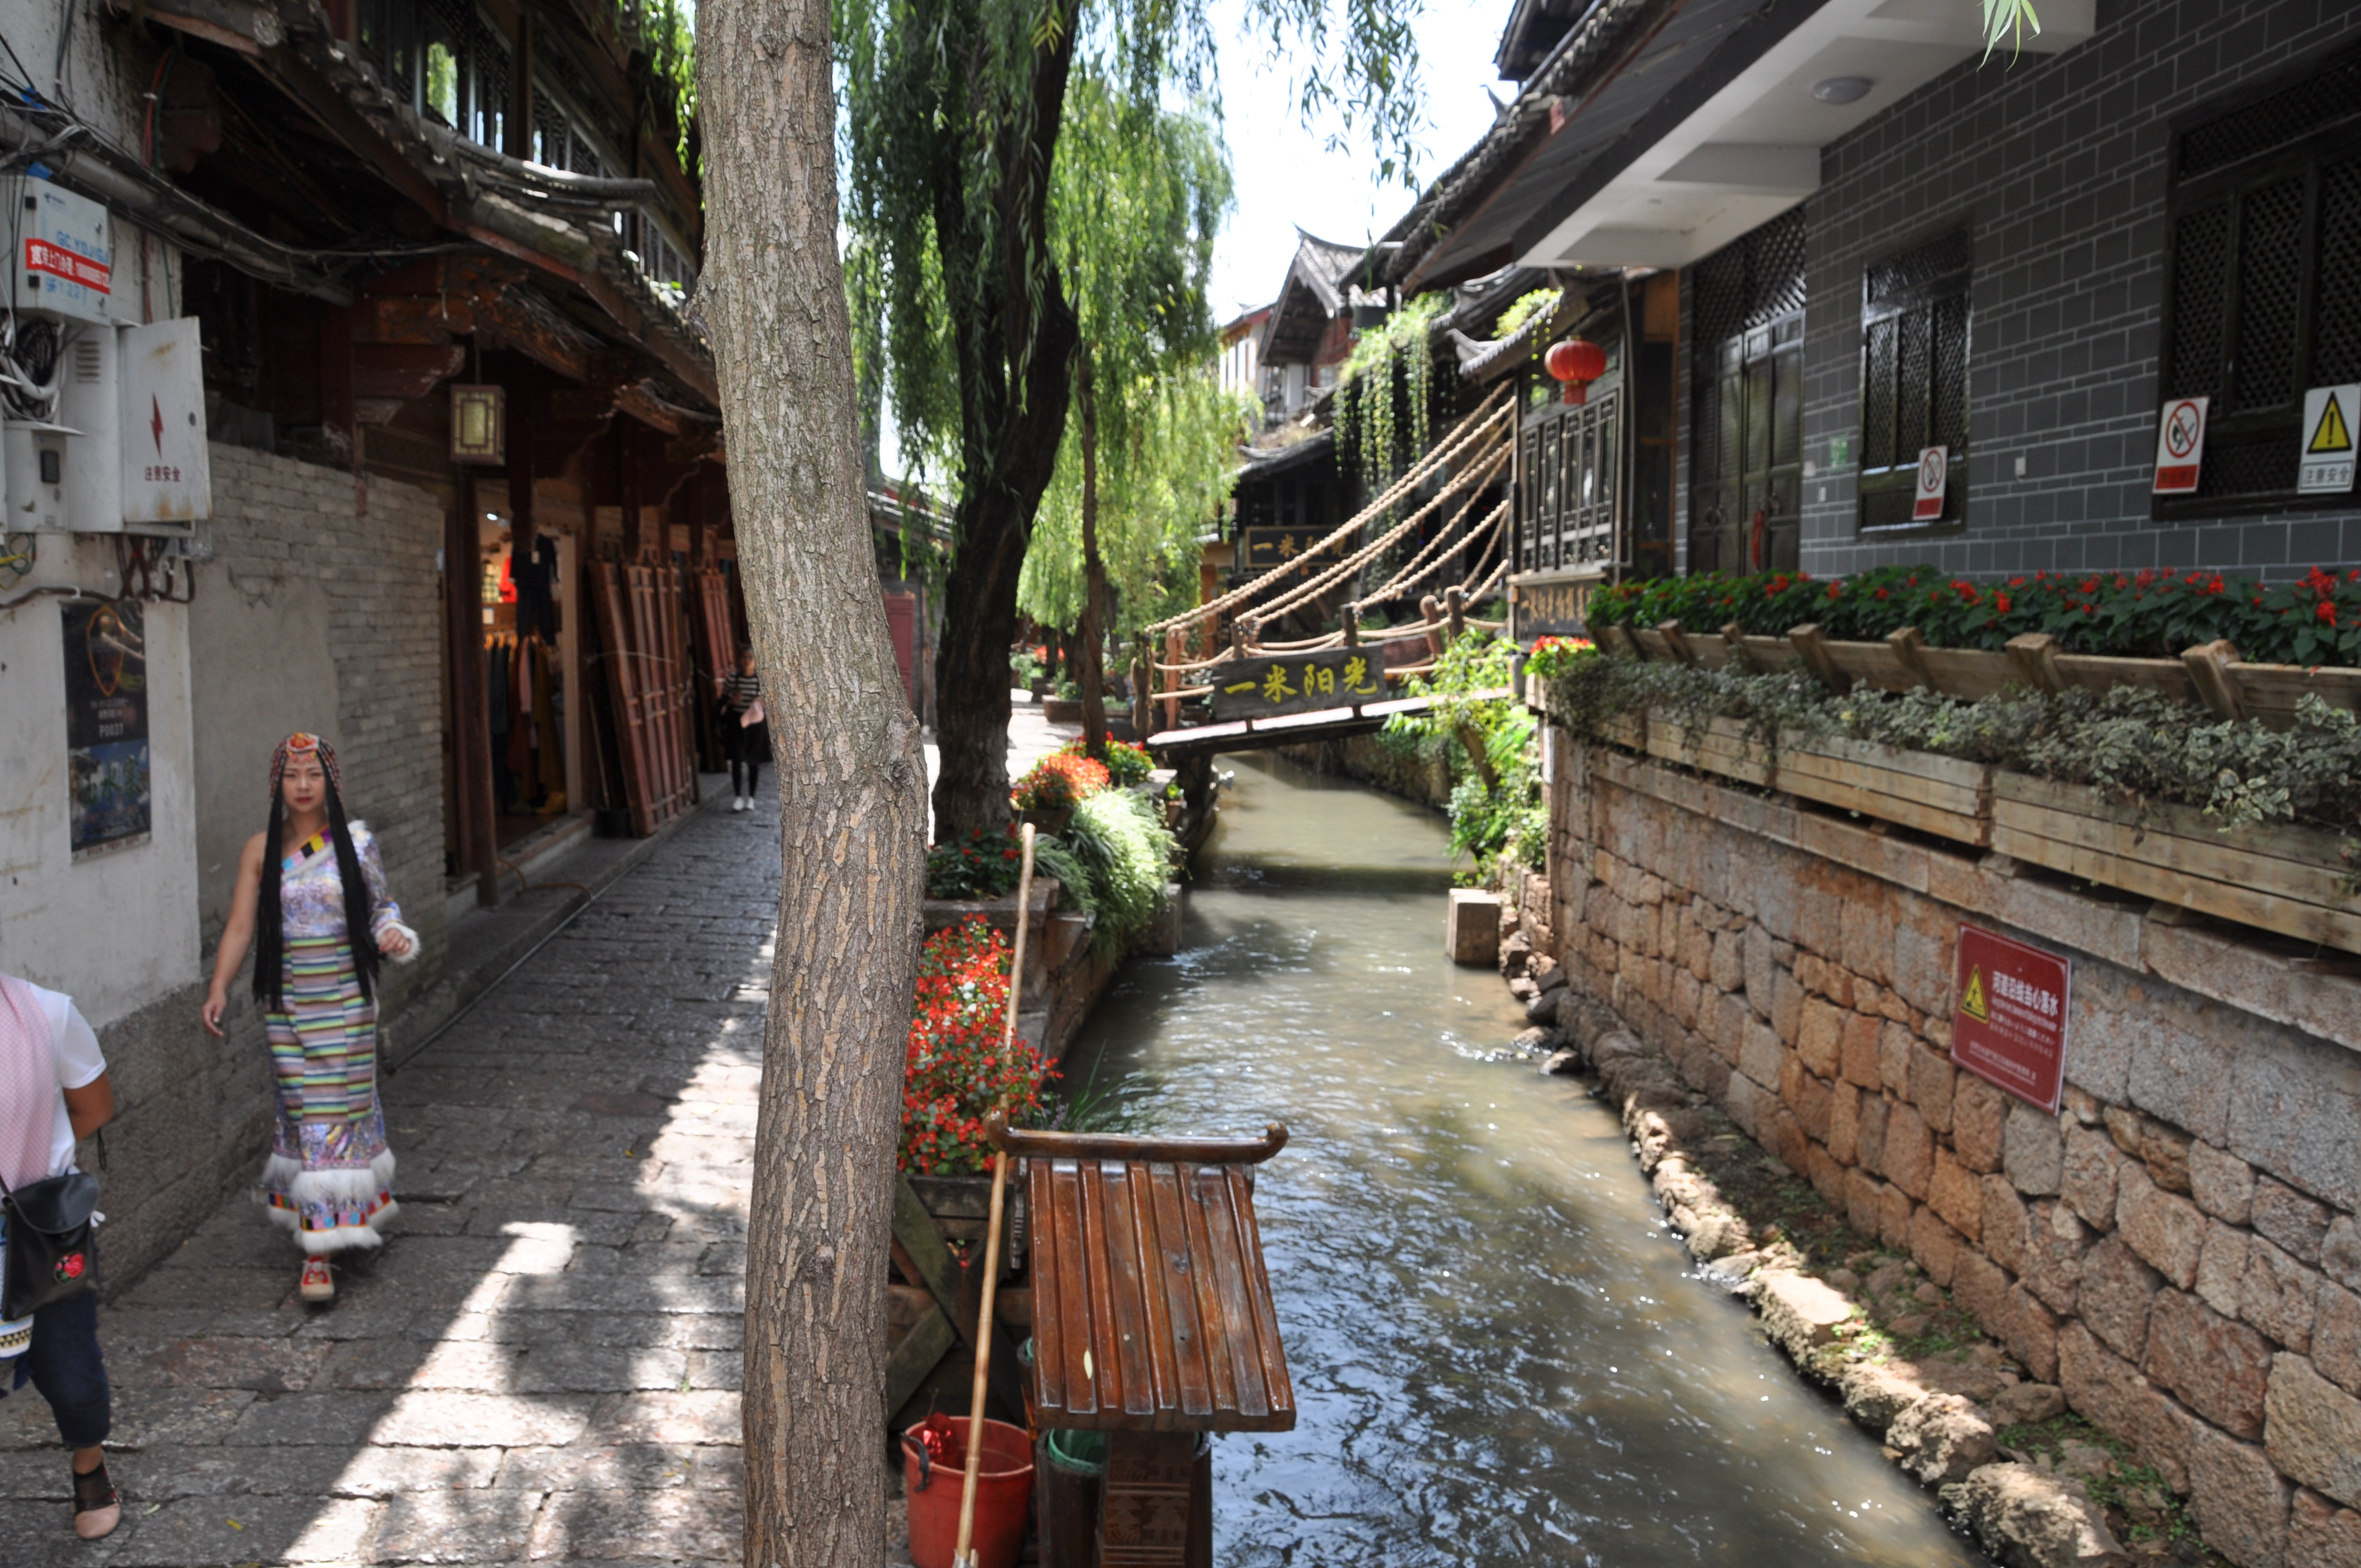 Two Travel The World - Lijiang Old Town